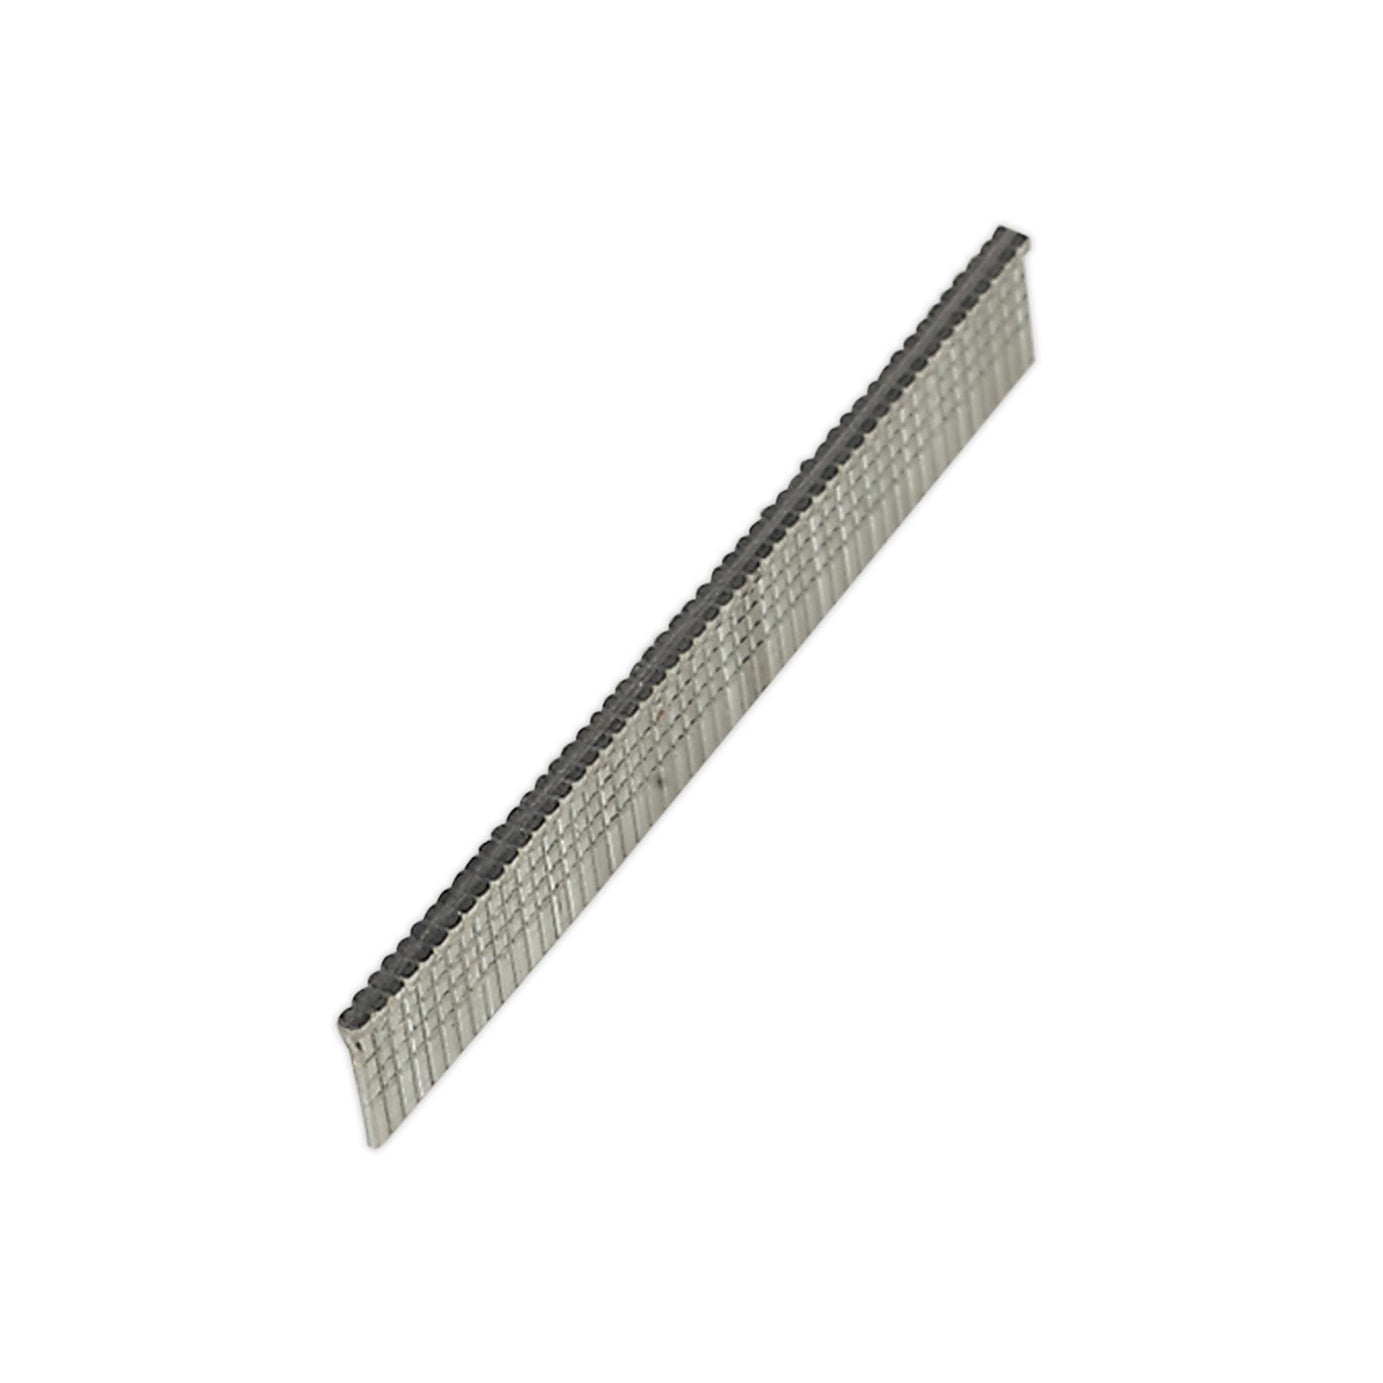 Sealey Nail 12mm 18SWG Fits Sealey And Other Brands. Pack of 500